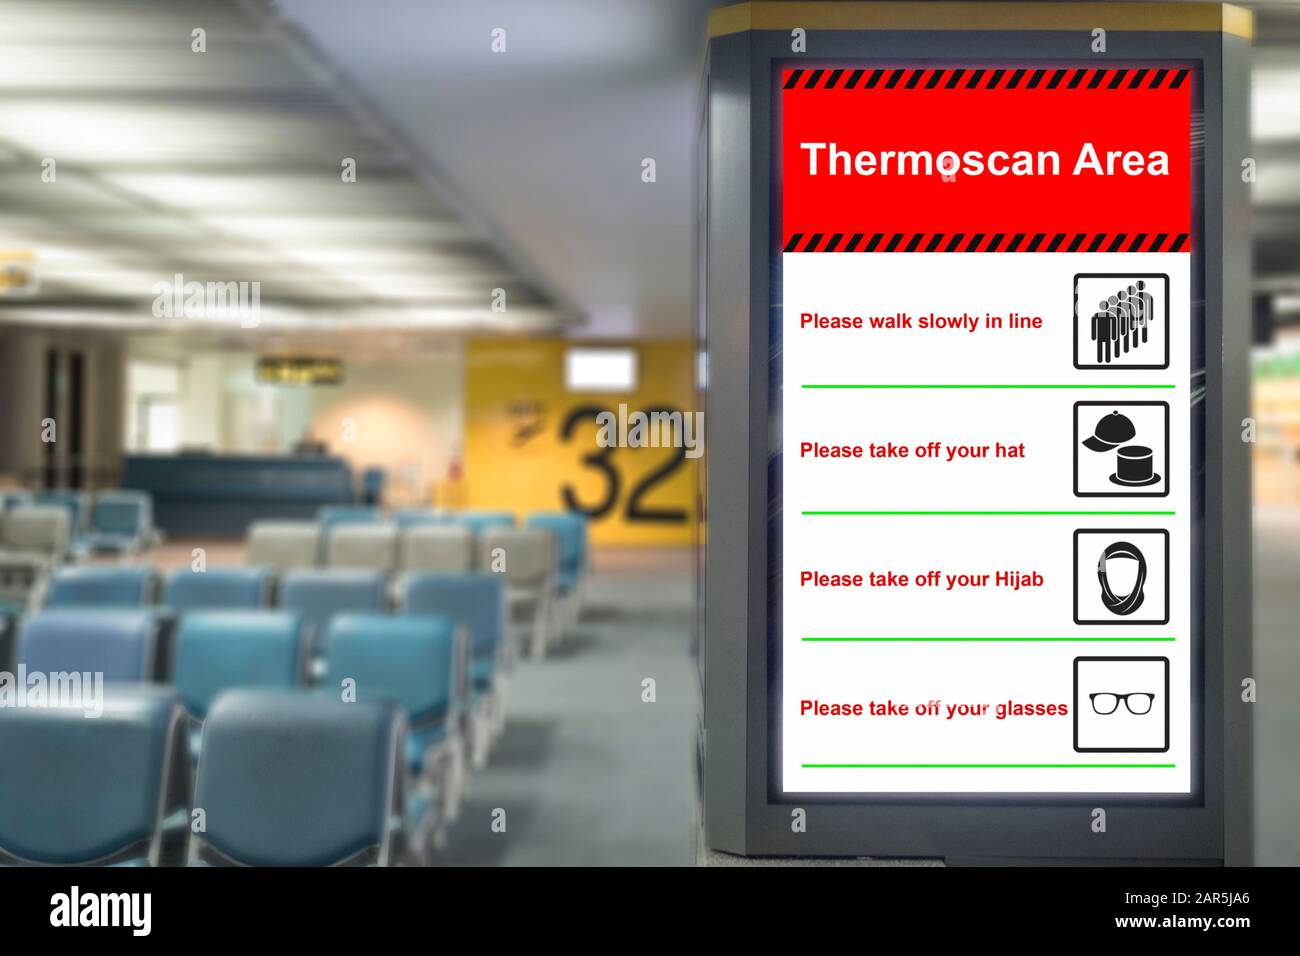 Health Control: Thermoscan Area sign at the airport for outbreak control situation at passengers arriving terminal by Public Health Officials Stock Photo